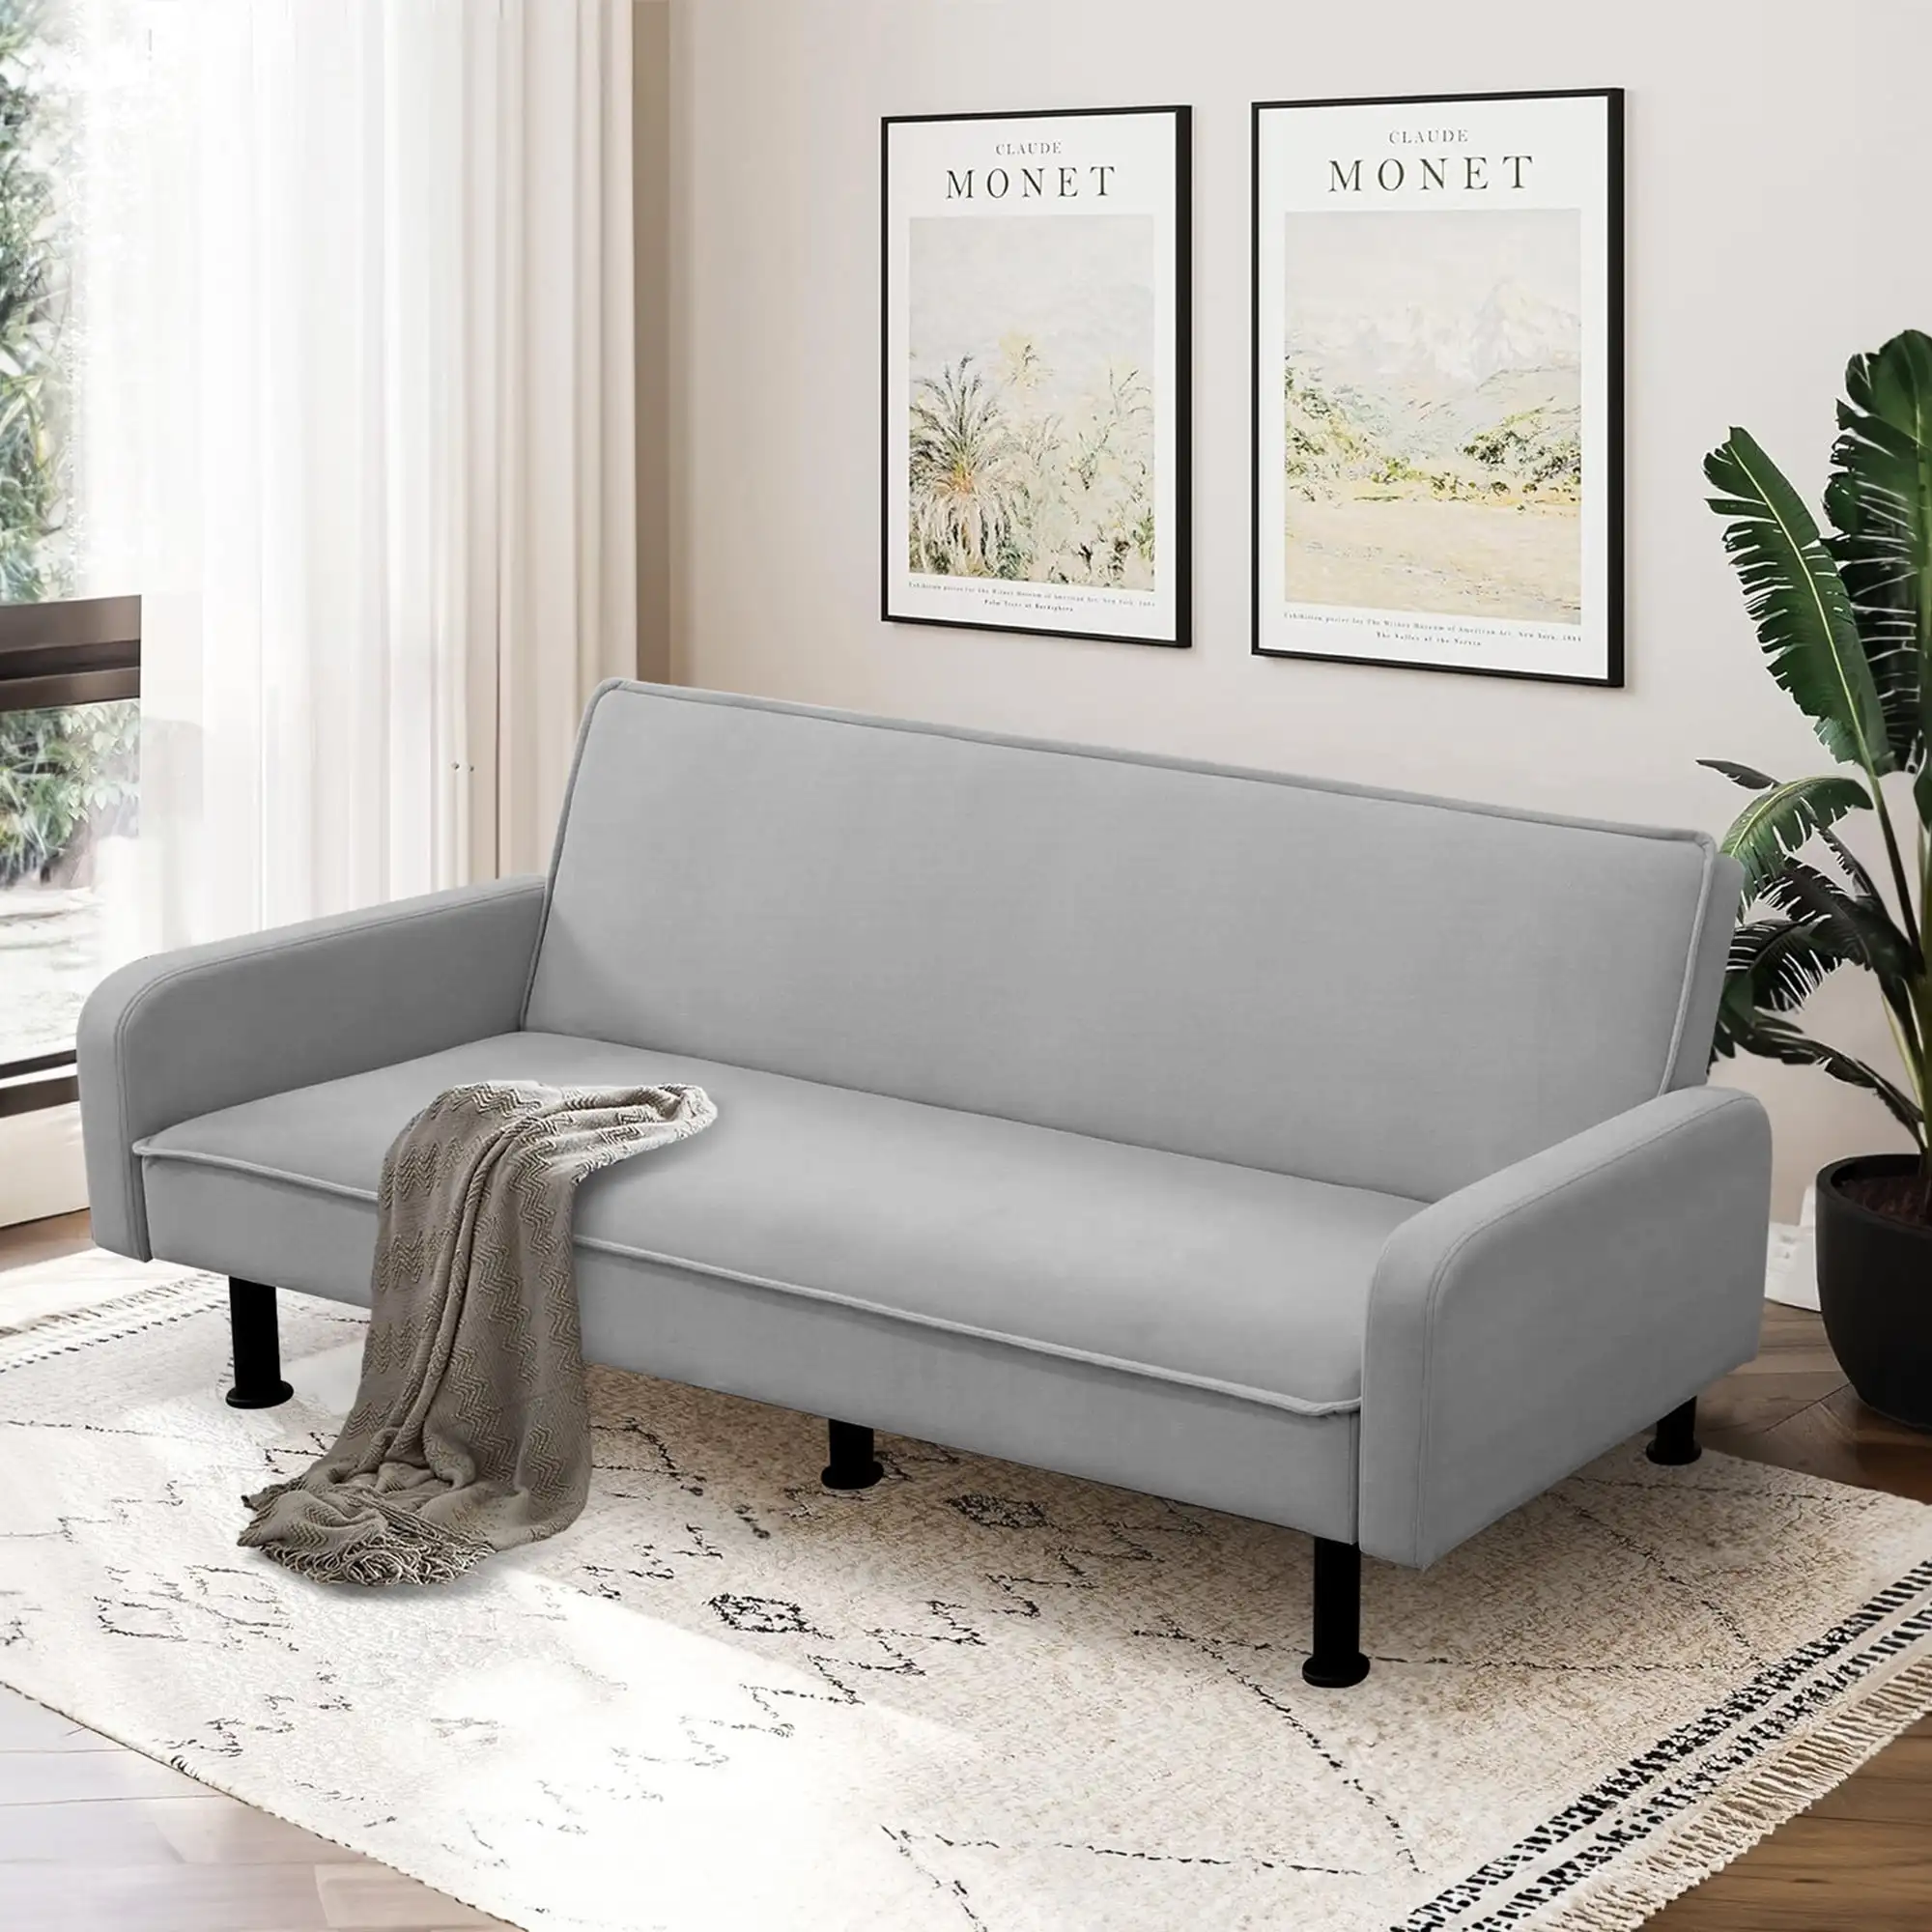 Aukfa 78" Futon Sofa Bed Upholstered Loveseat for Home Office Flannel Gray